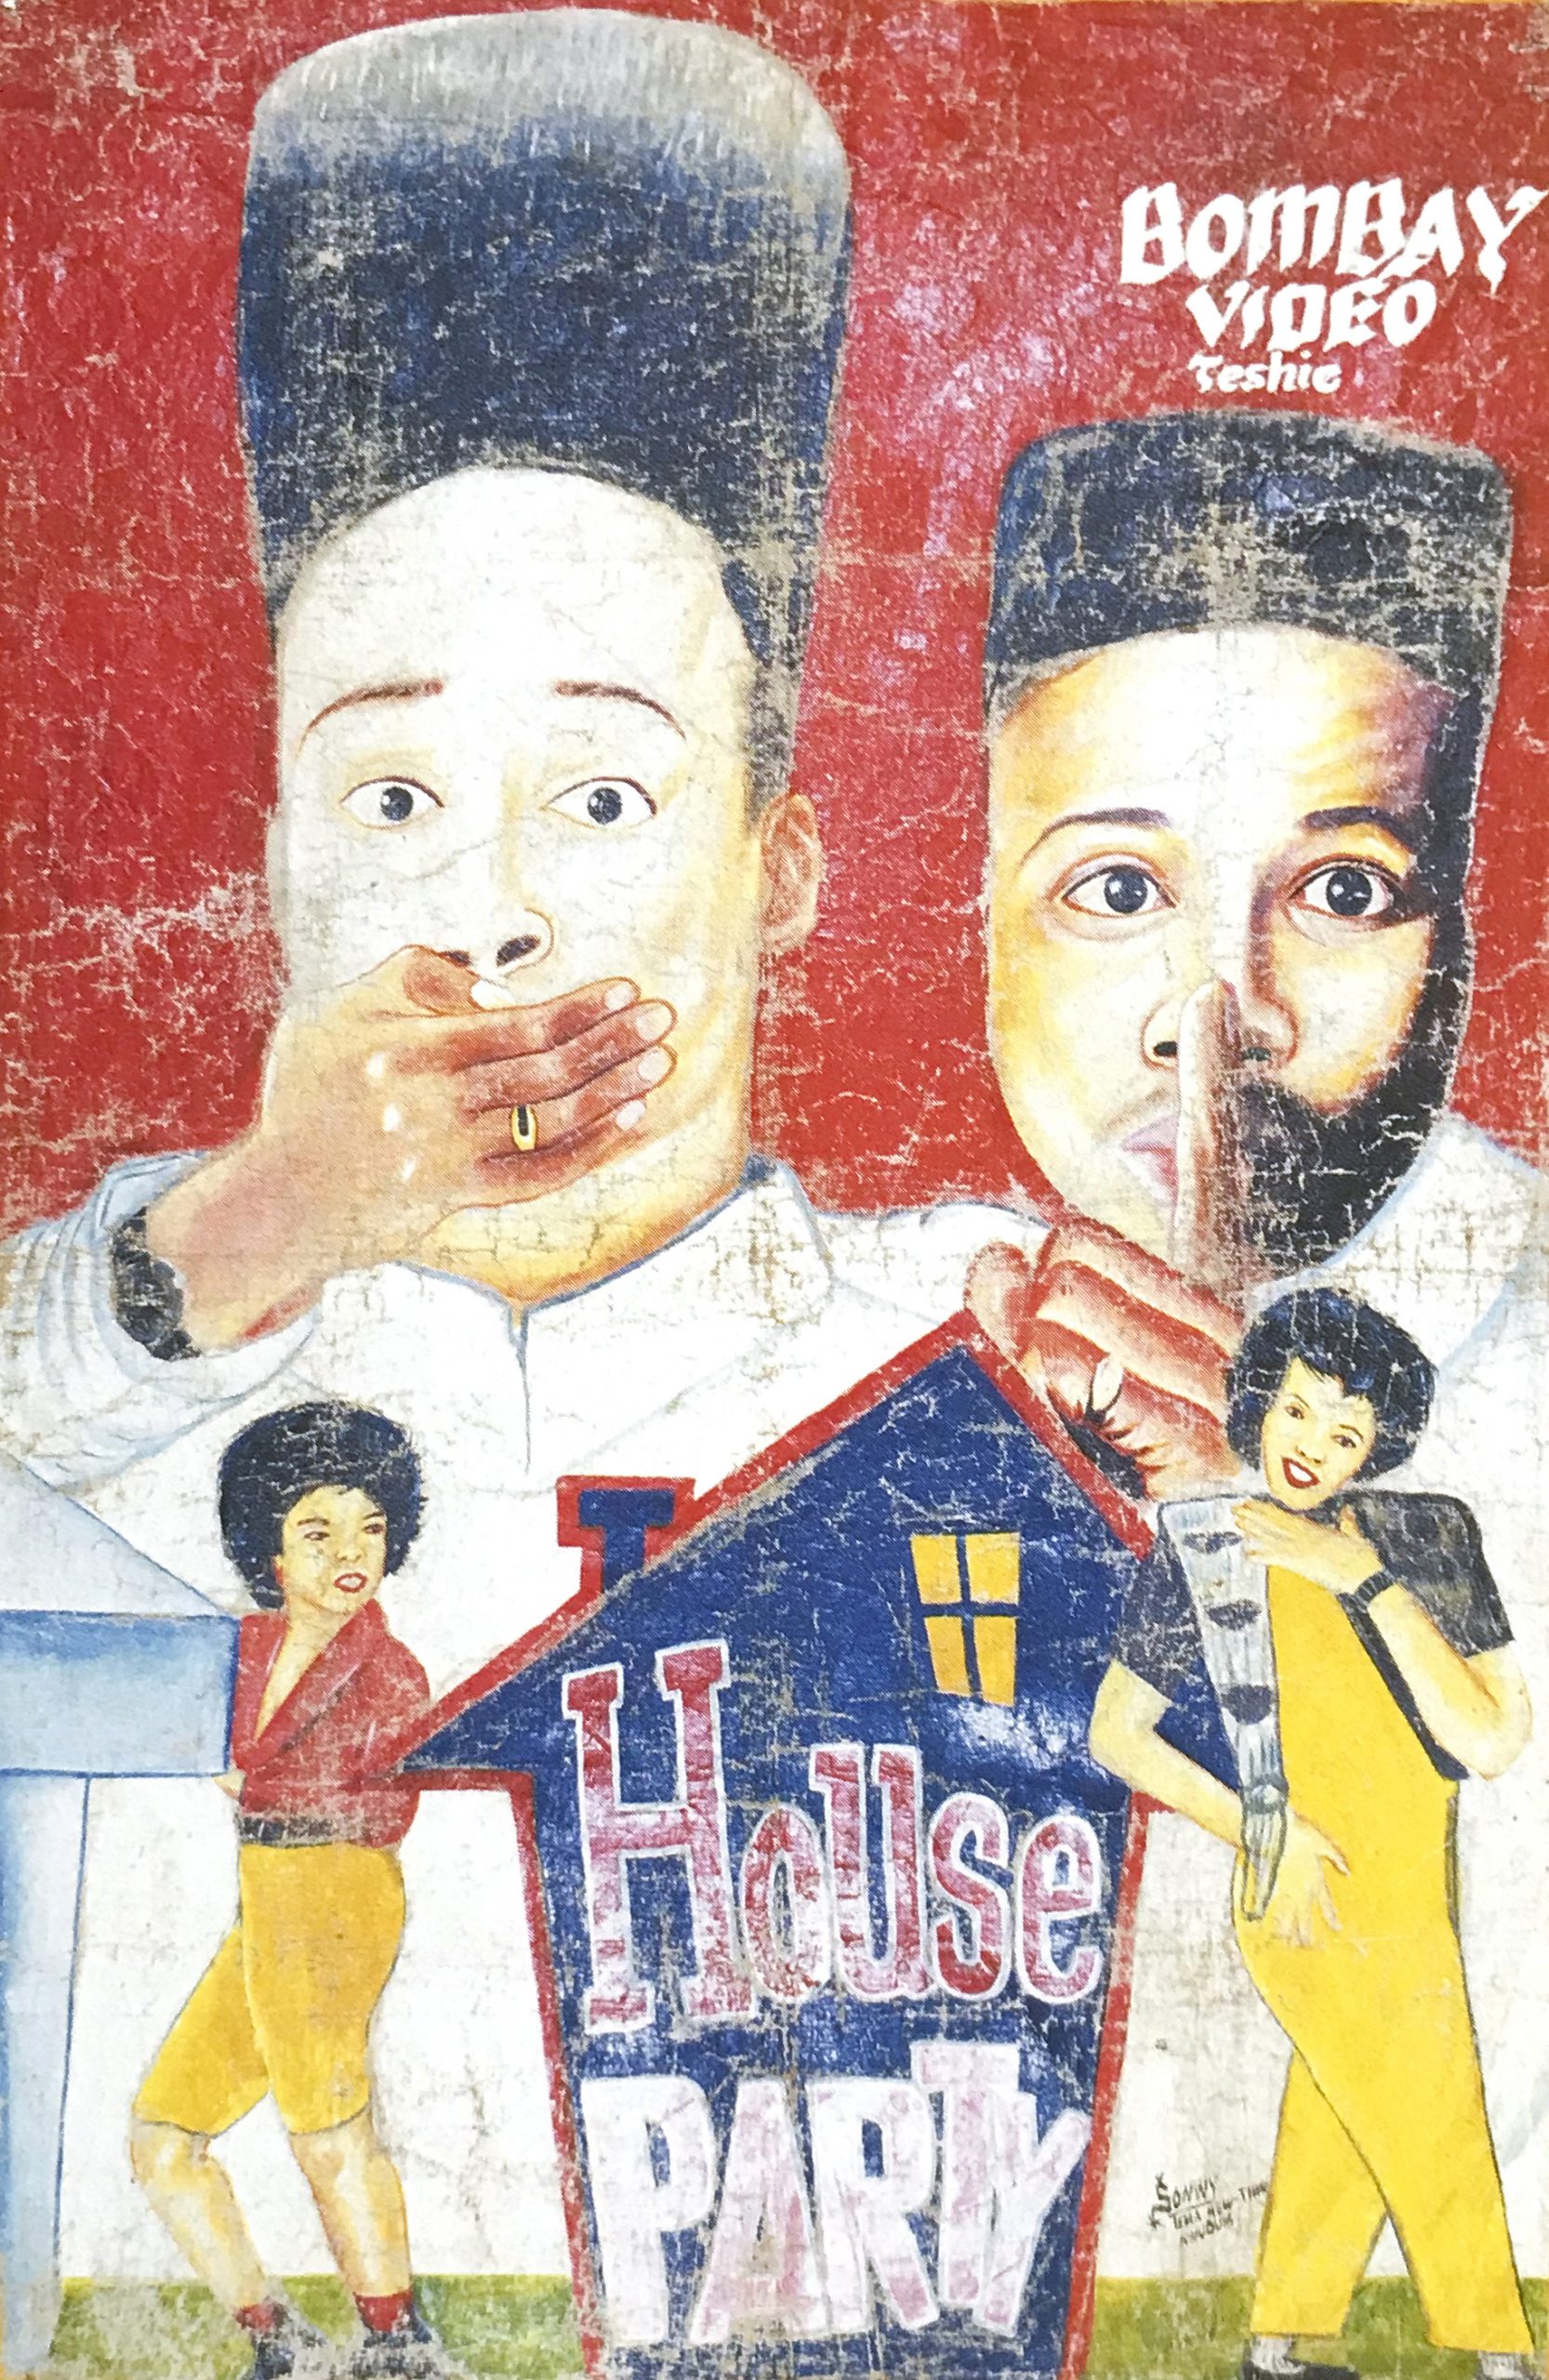 A movie poster of 2 men covering their mouth over 2 women posing by a house silhouette.